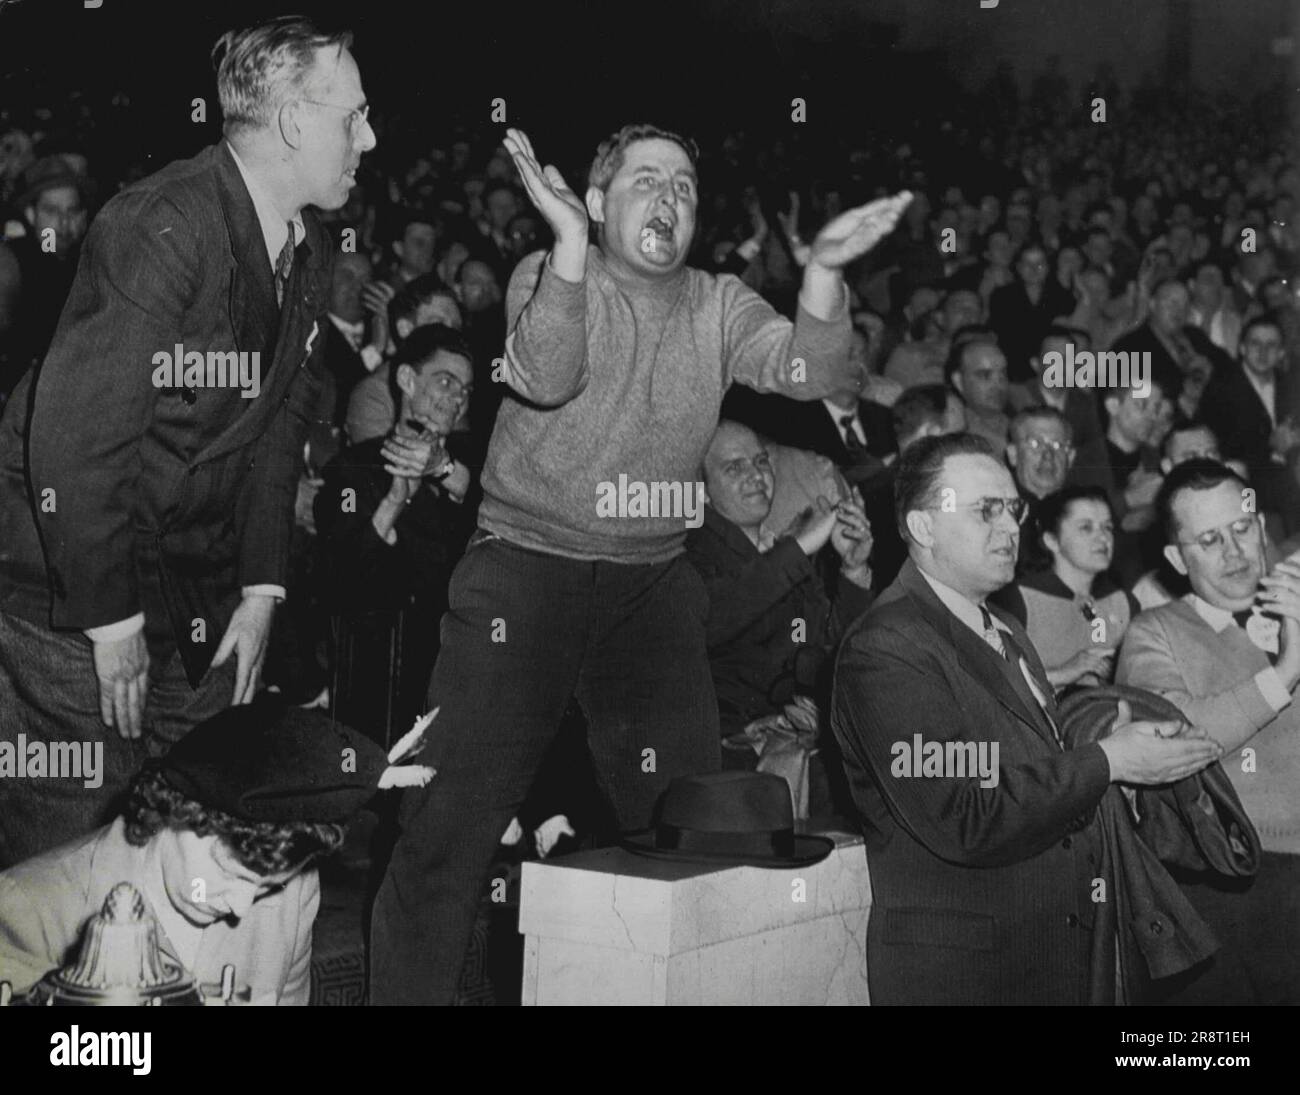 Striker Shouts Against Settlement - A worker of the Philadelphia Transportation company shouts against settling the transit strike here early today during a mass meeting of strikers after negotiators had reached agreement in the ten-day strike. Other strikers applaud or shout during the stormy session. February 20, 1949. (Photo by AP Wirephoto). Stock Photo